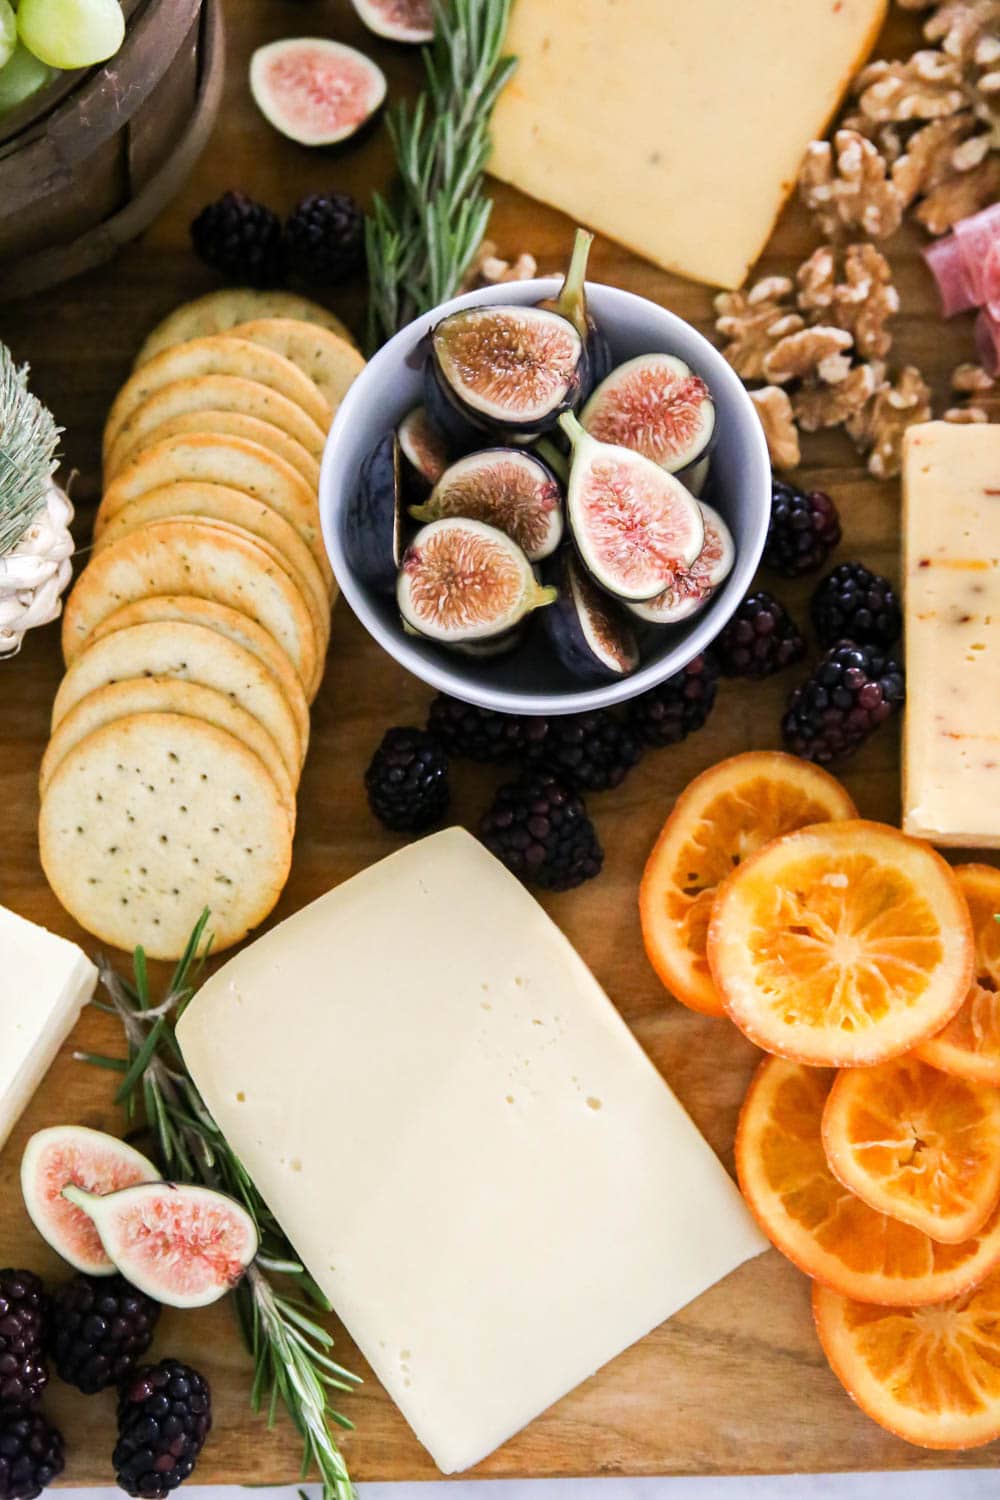 The best cheese for a cheese board is Grand Cru! #ABlissfulNest #cheeseboard #fall #ad #RothCheese